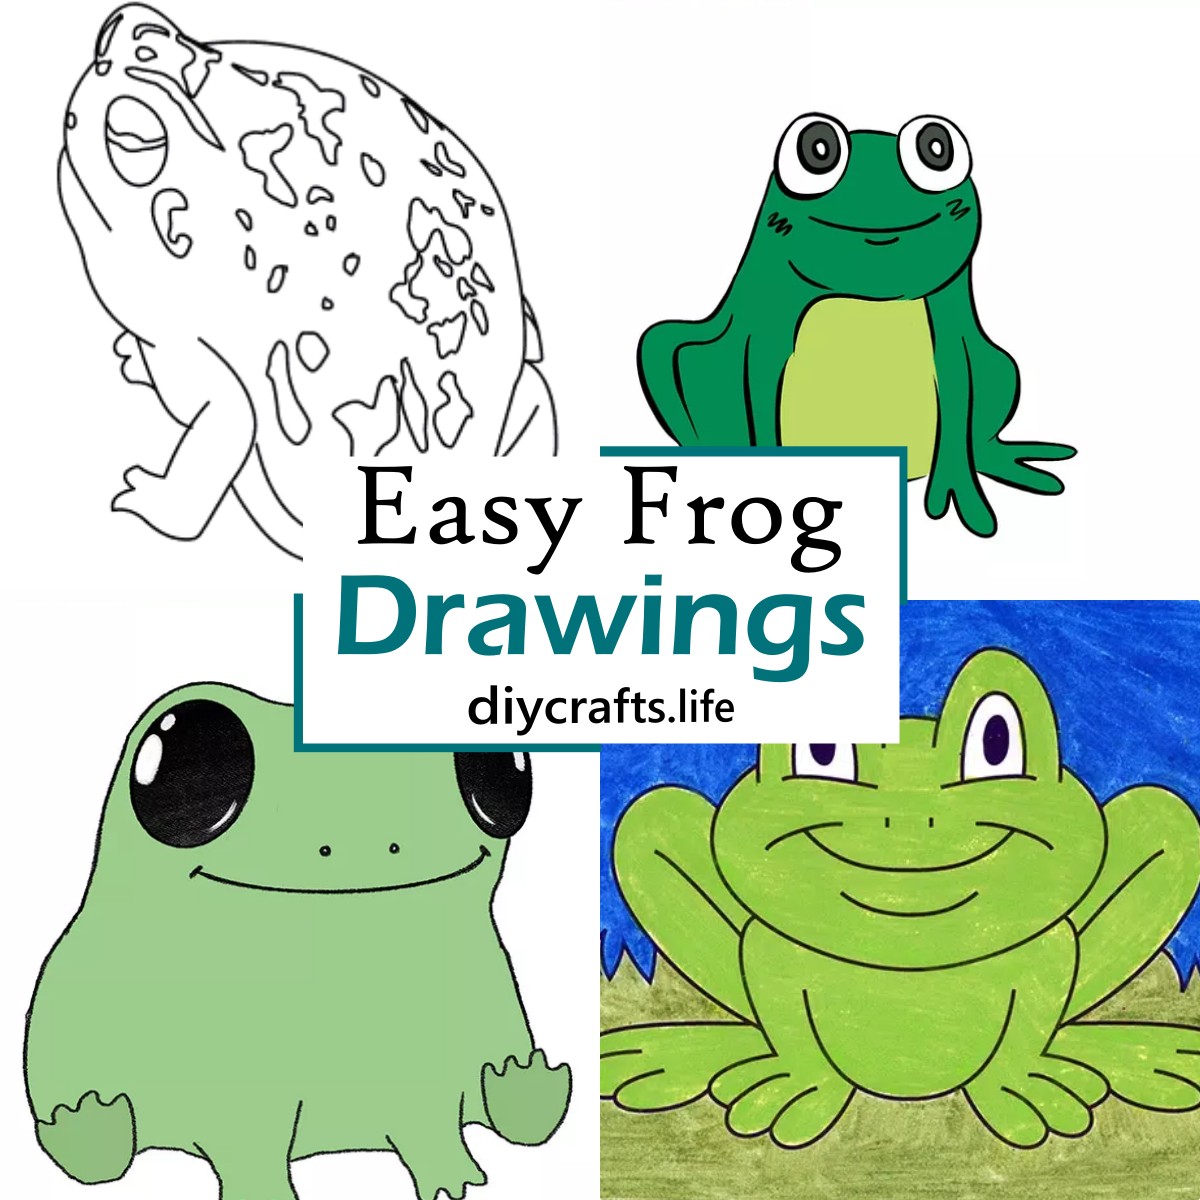 How To Draw a Frog: 10 Easy Drawing Projects-saigonsouth.com.vn